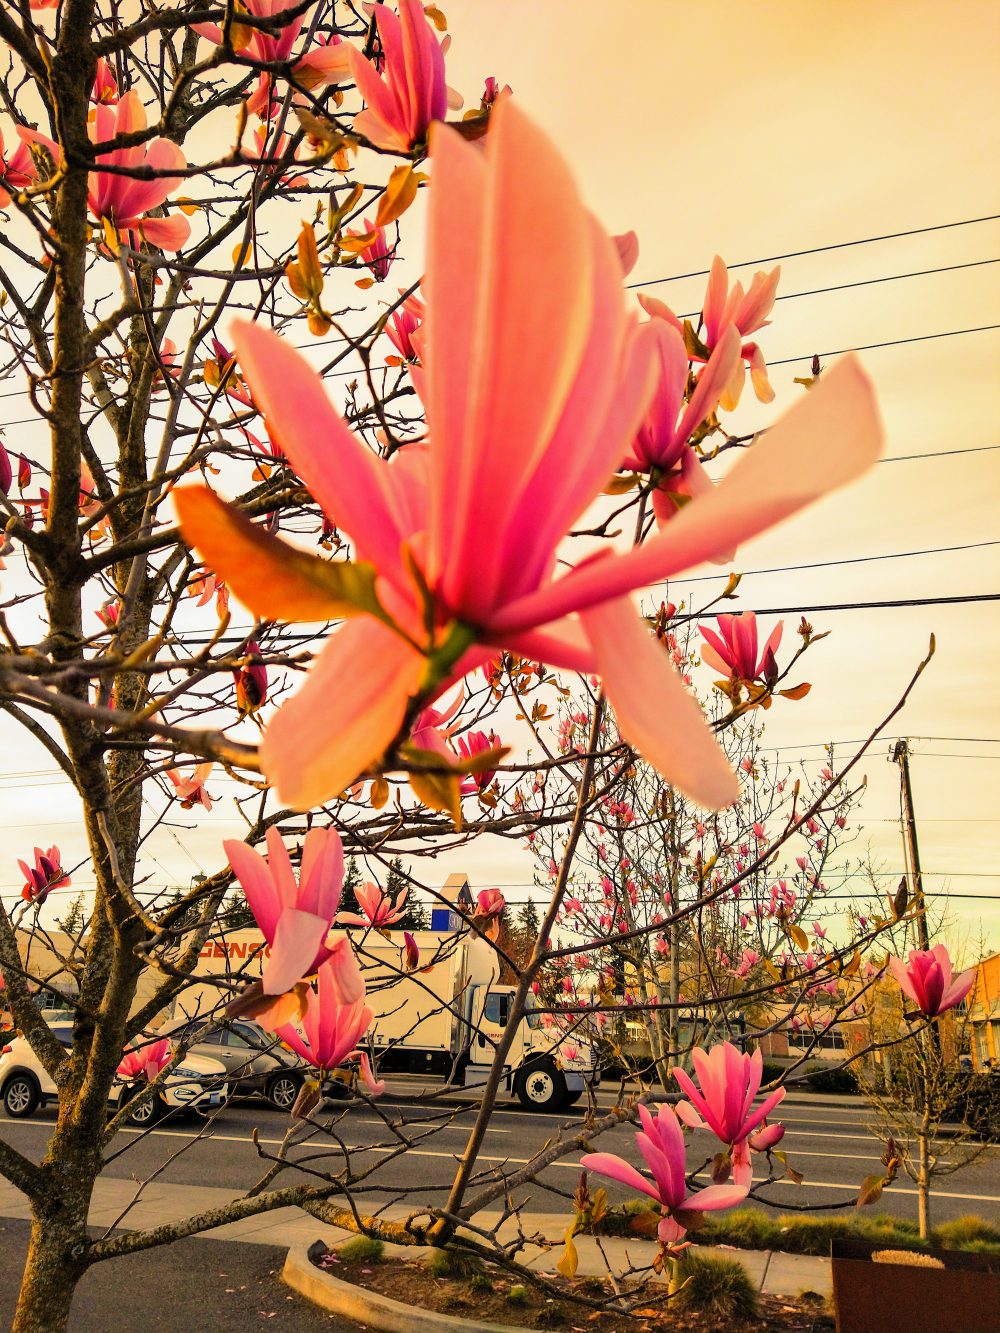 A close-up photograph of a blooming tree with a busy street in the background.